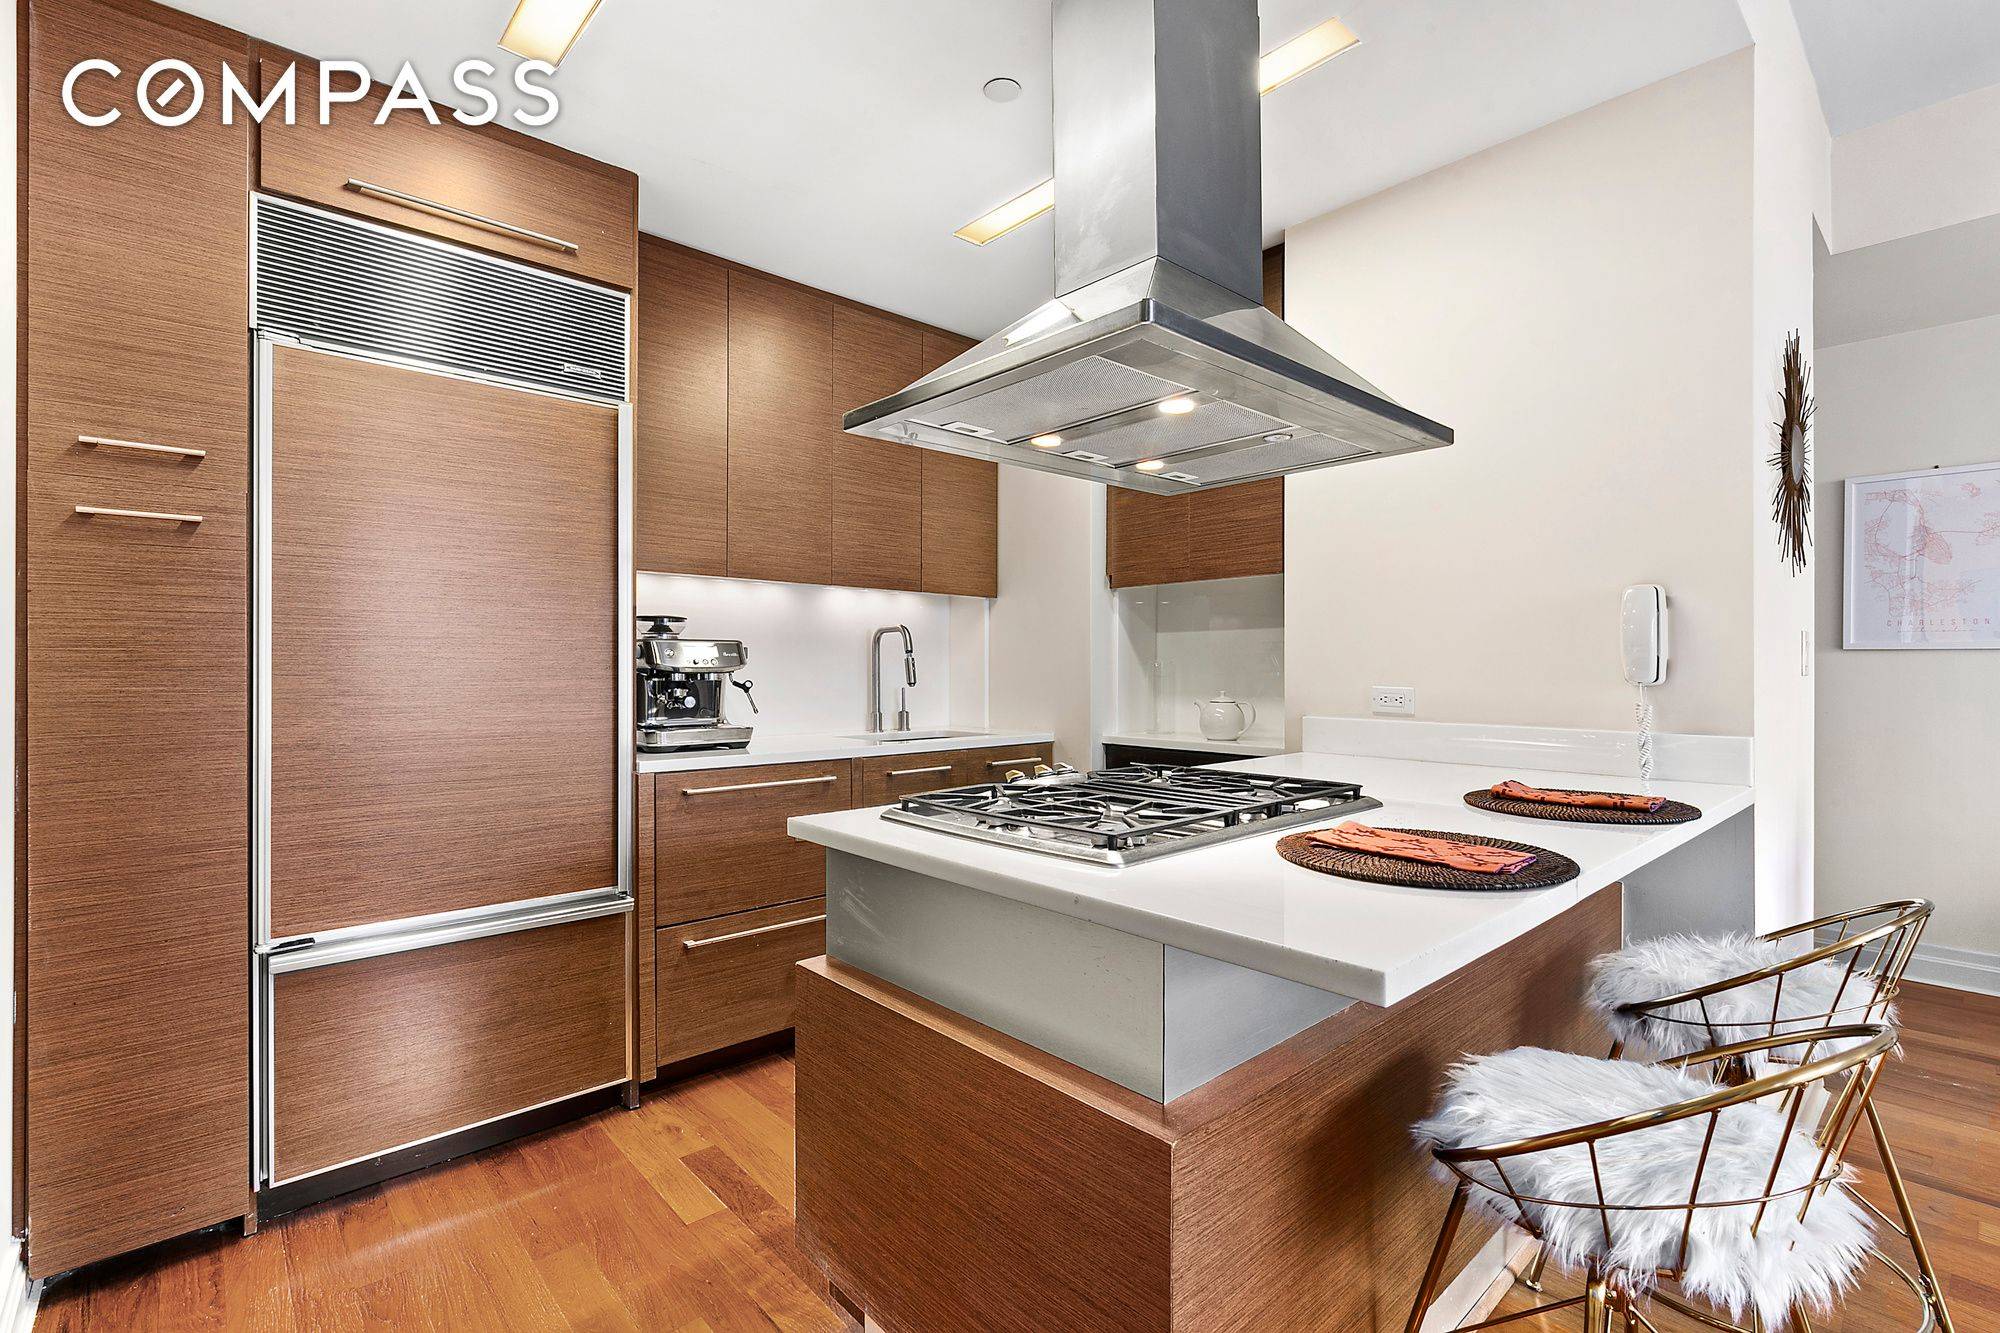 Clean and Bright new construction one bedroom apartment with Empire State Building views through floor to ceiling glass windows !